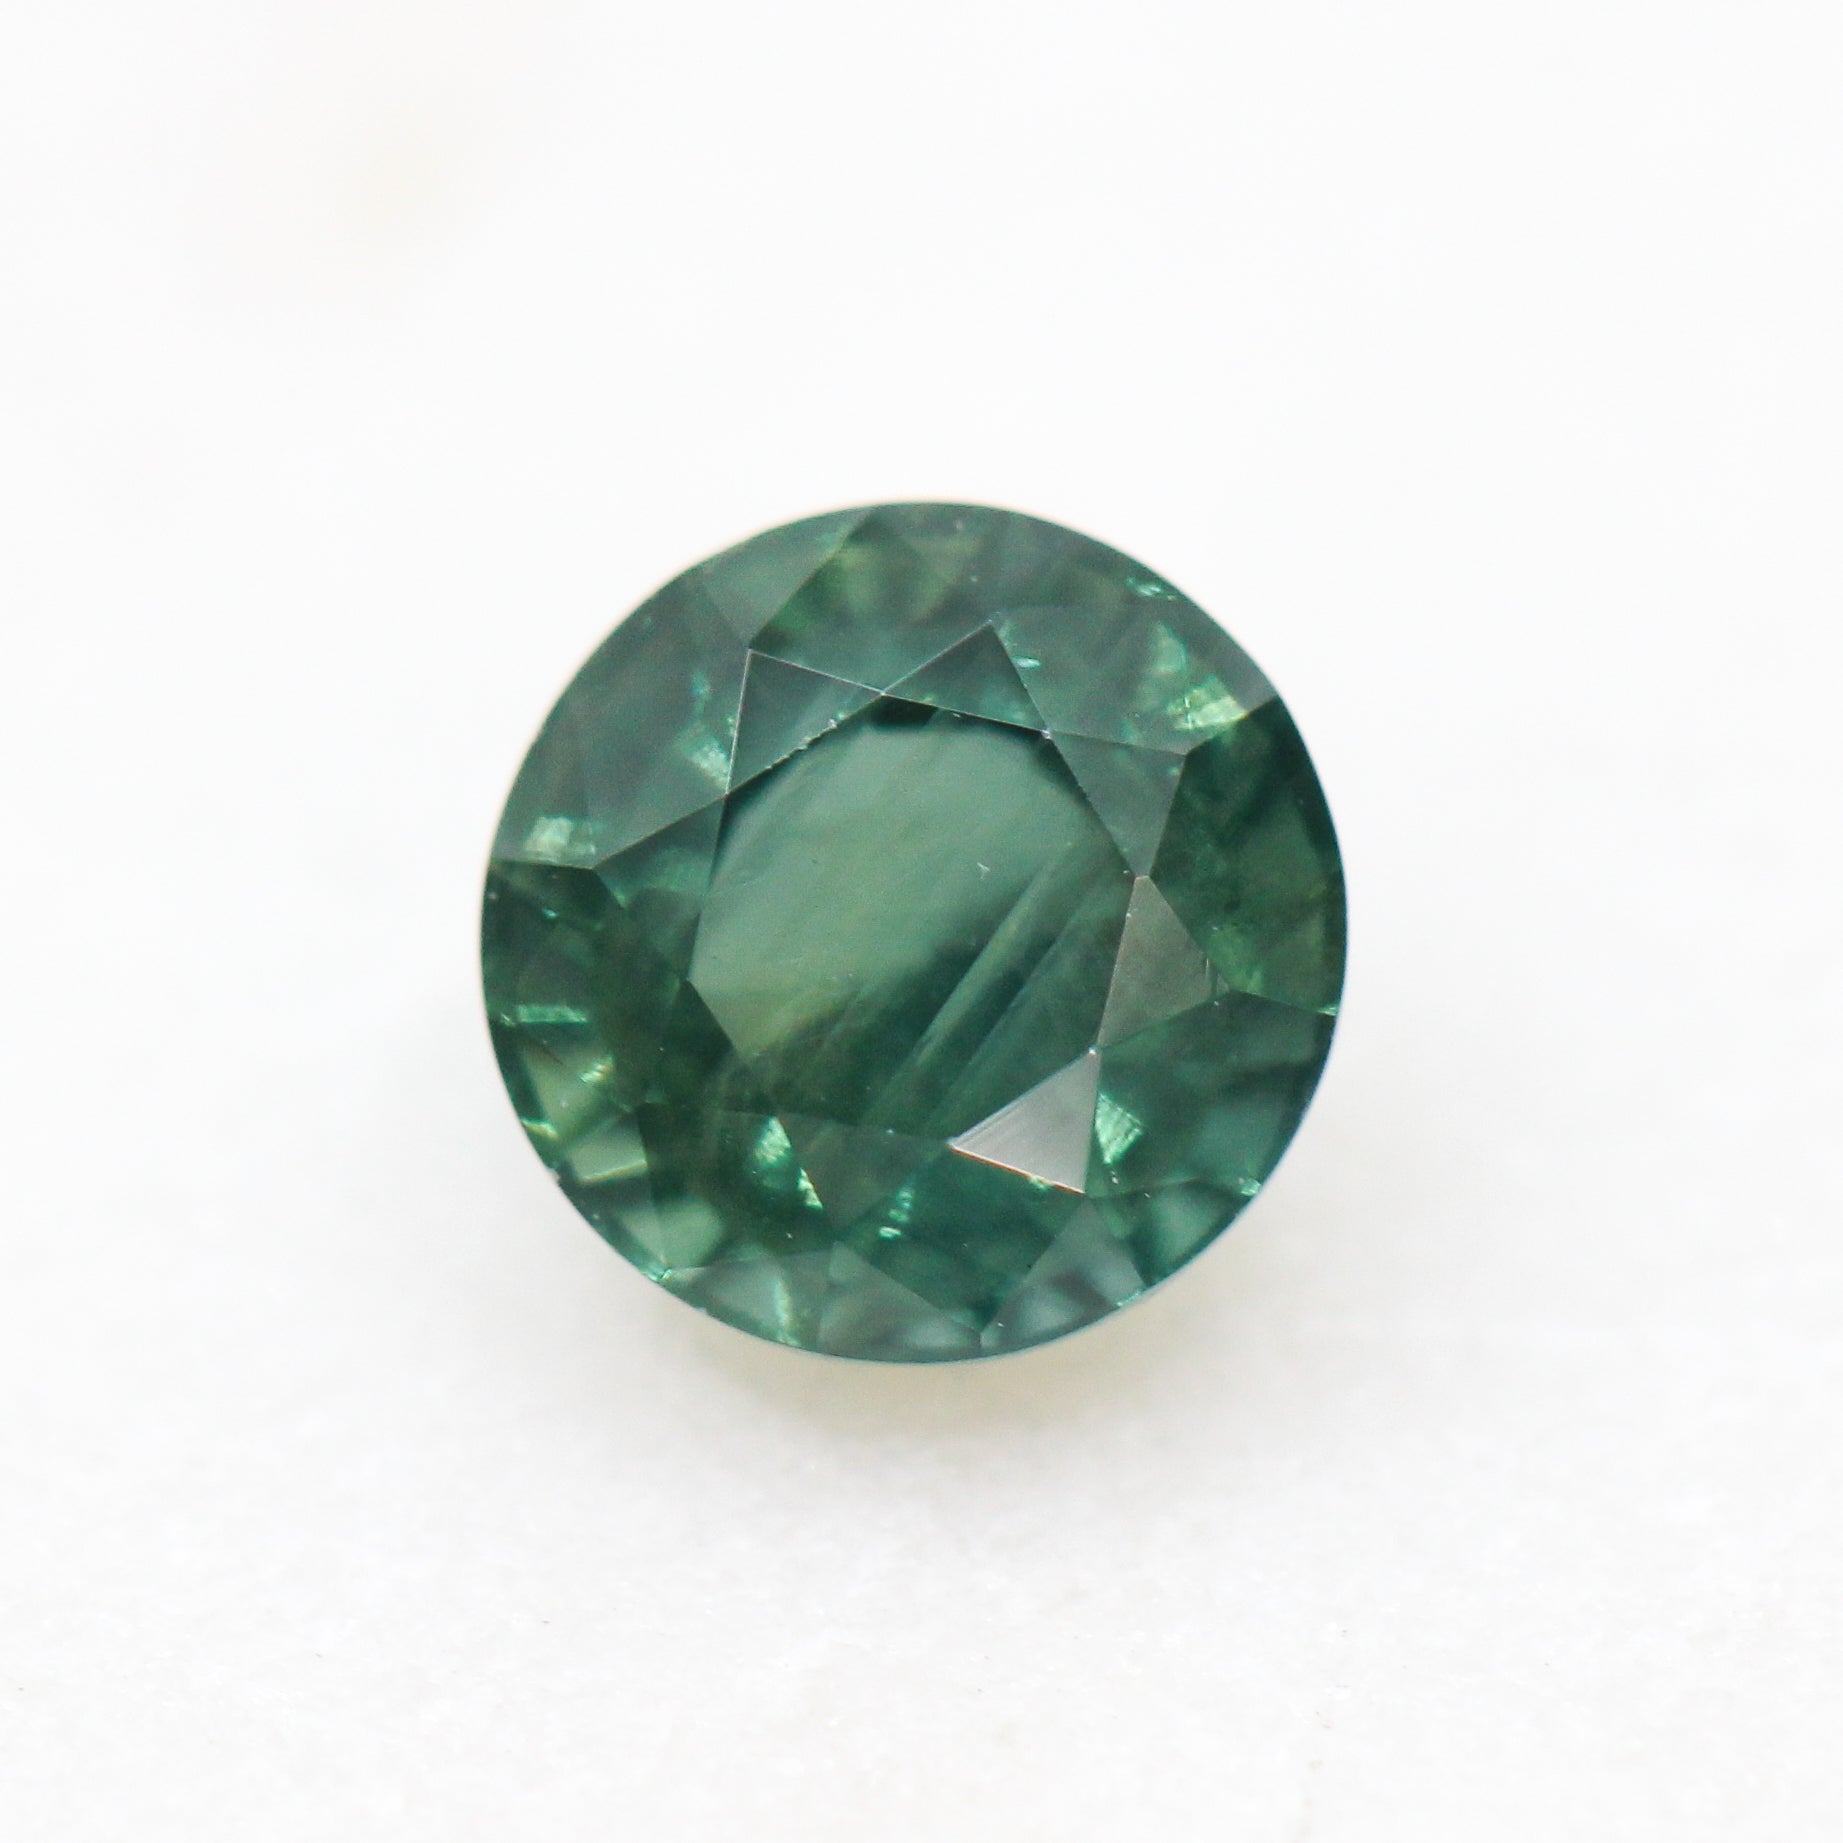 0.73 Carat Certified Round Green Sapphire for Custom Work - Inventory Code GRS073 - Midwinter Co. Alternative Bridal Rings and Modern Fine Jewelry